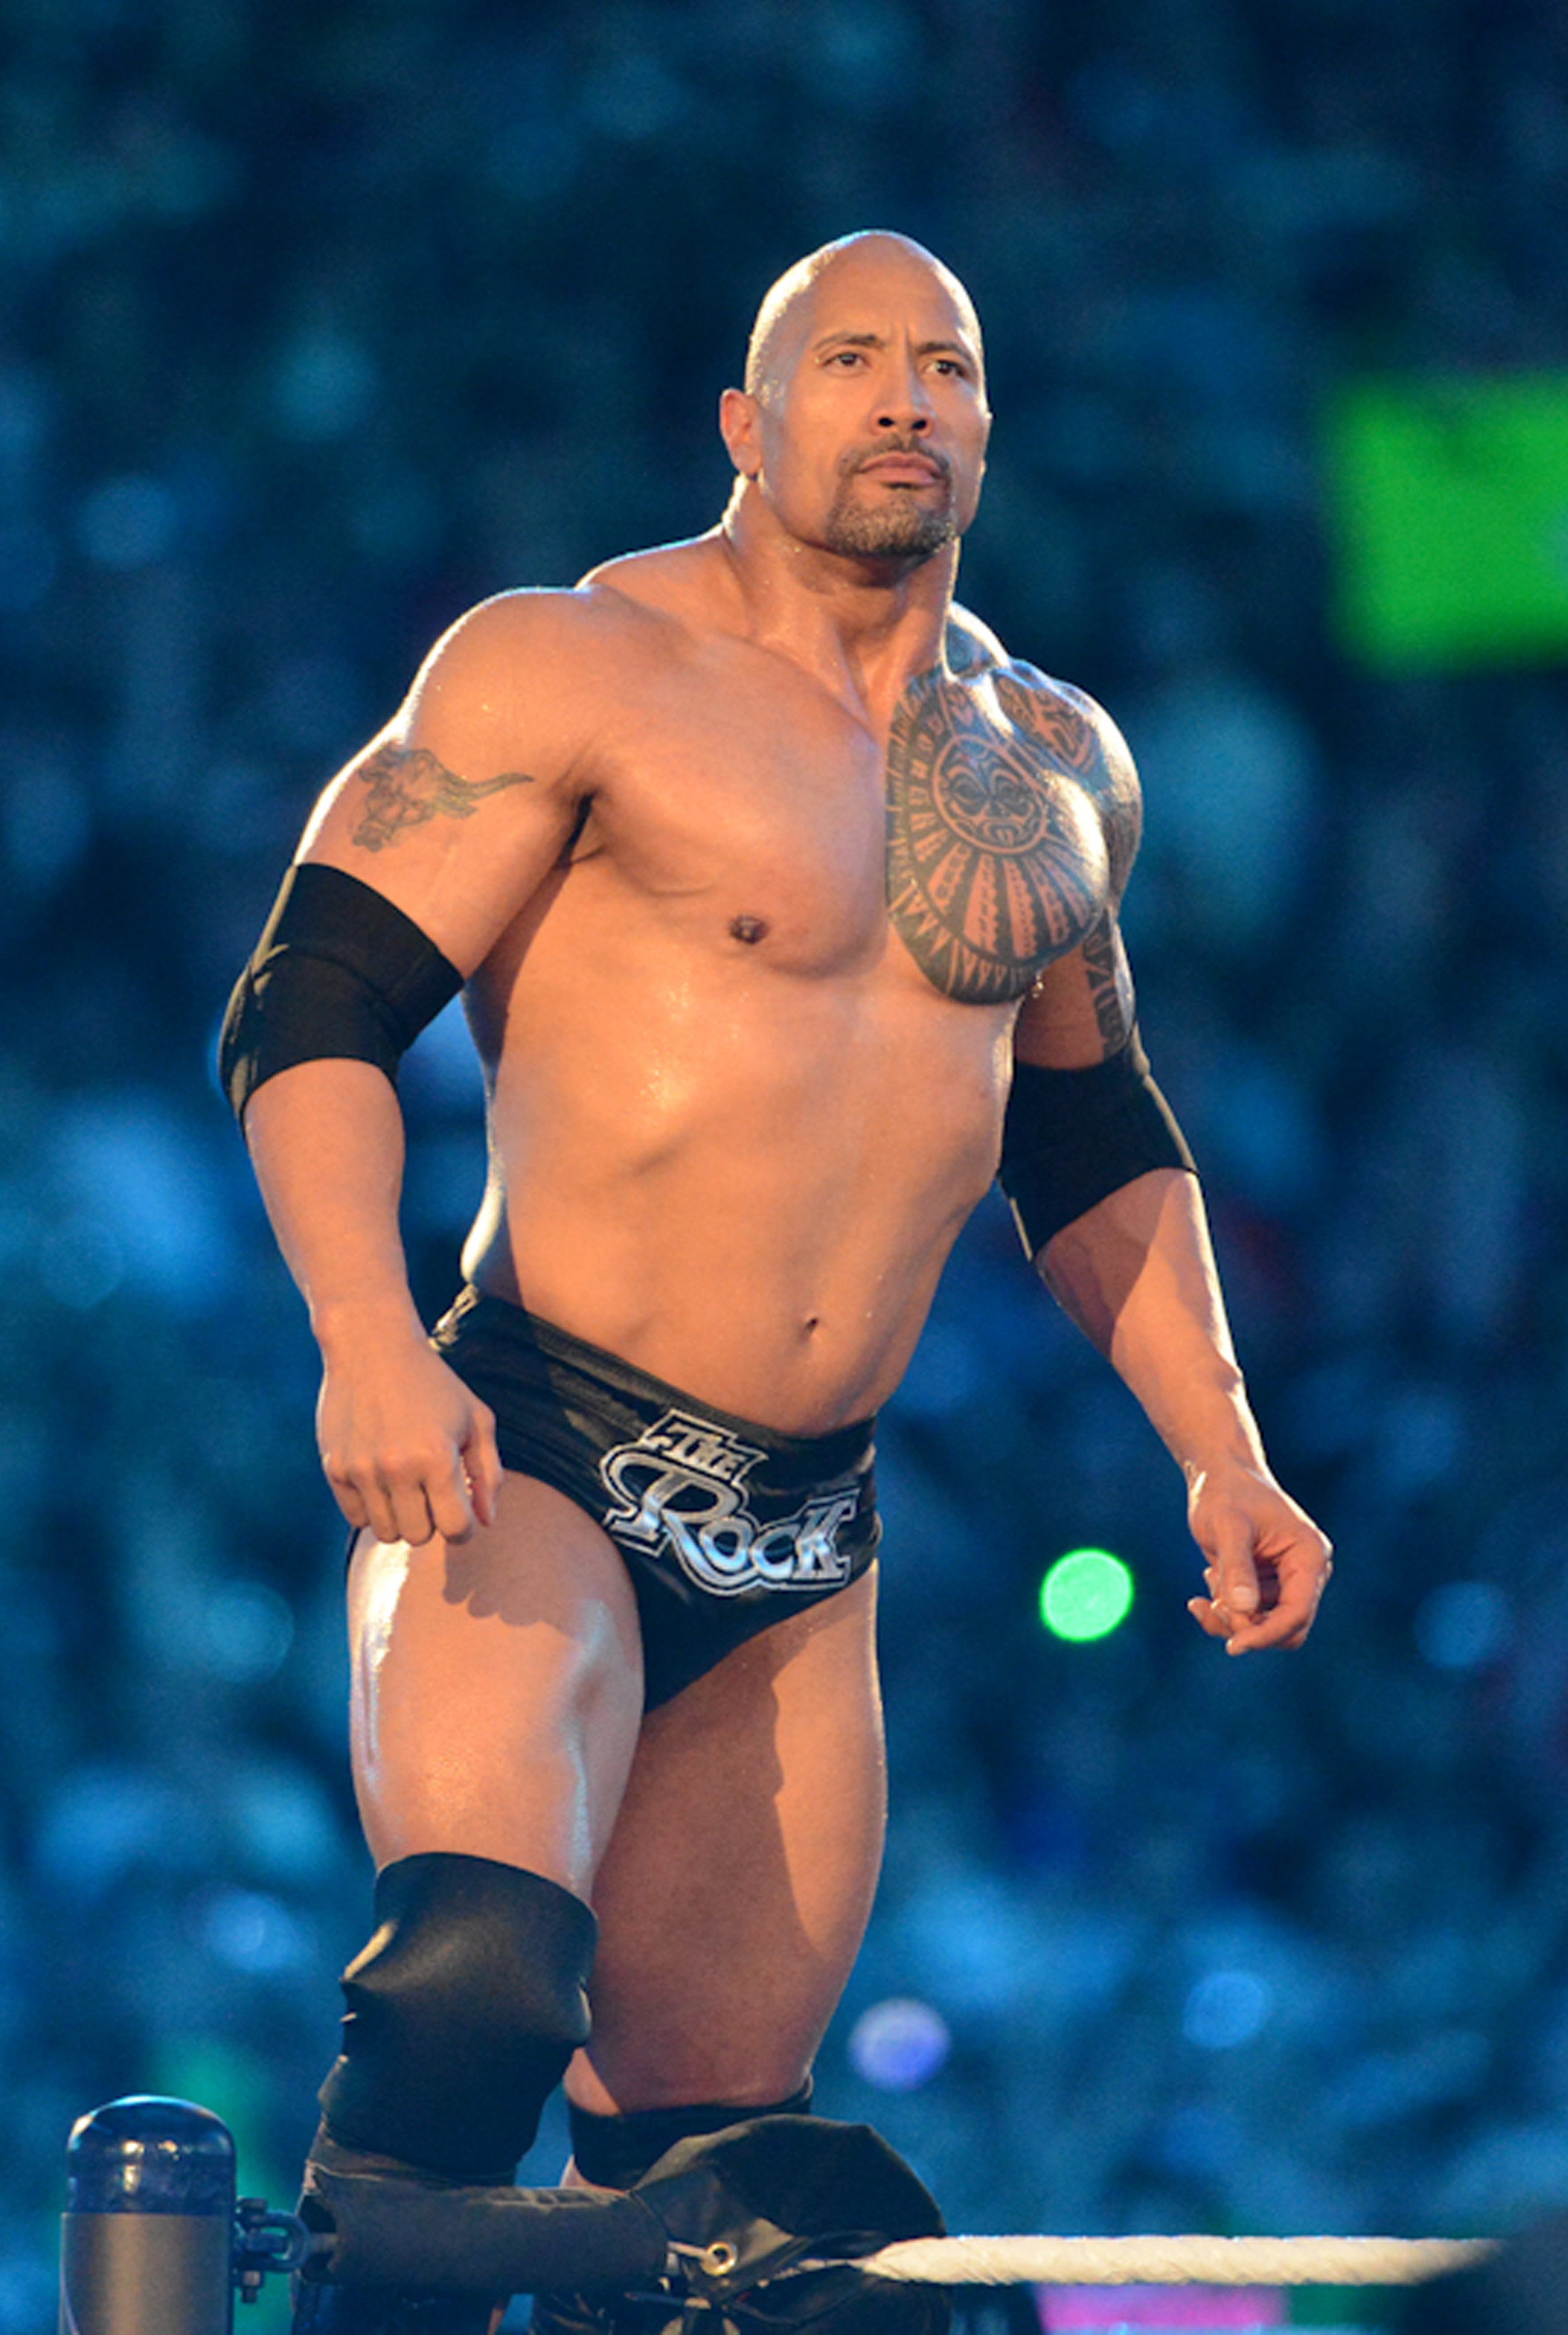 Dwayne was a WWE wrestler as seen here during WrestleMania in Florida in 2012 when his body was bigger because he followed a different training regimen